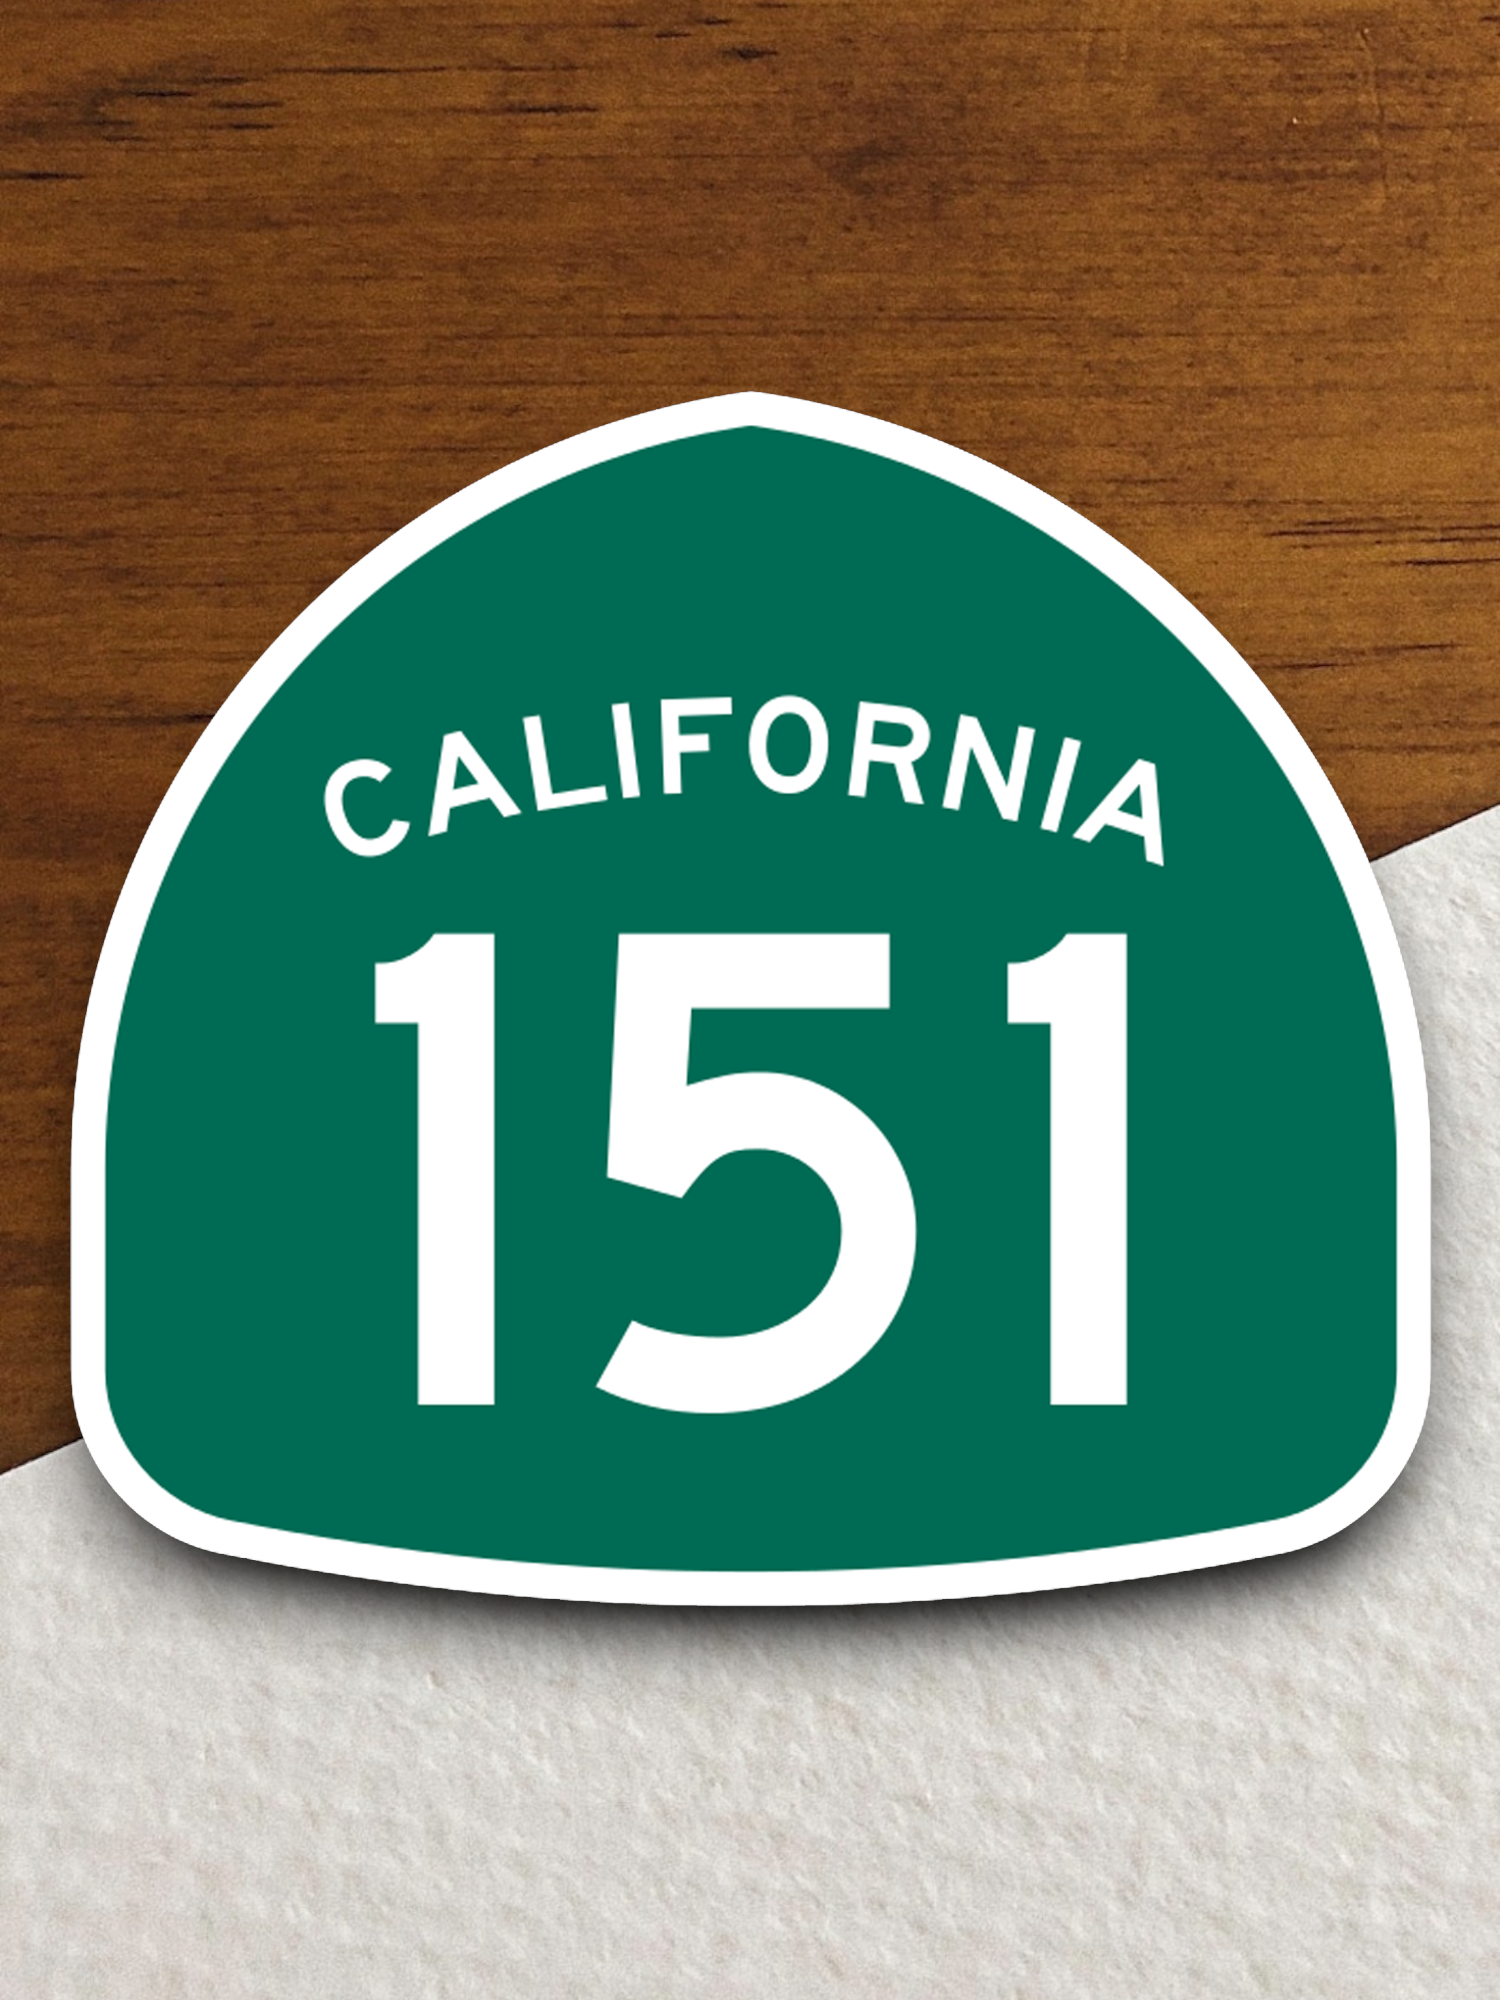 California State Route 151 Road Sign Sticker